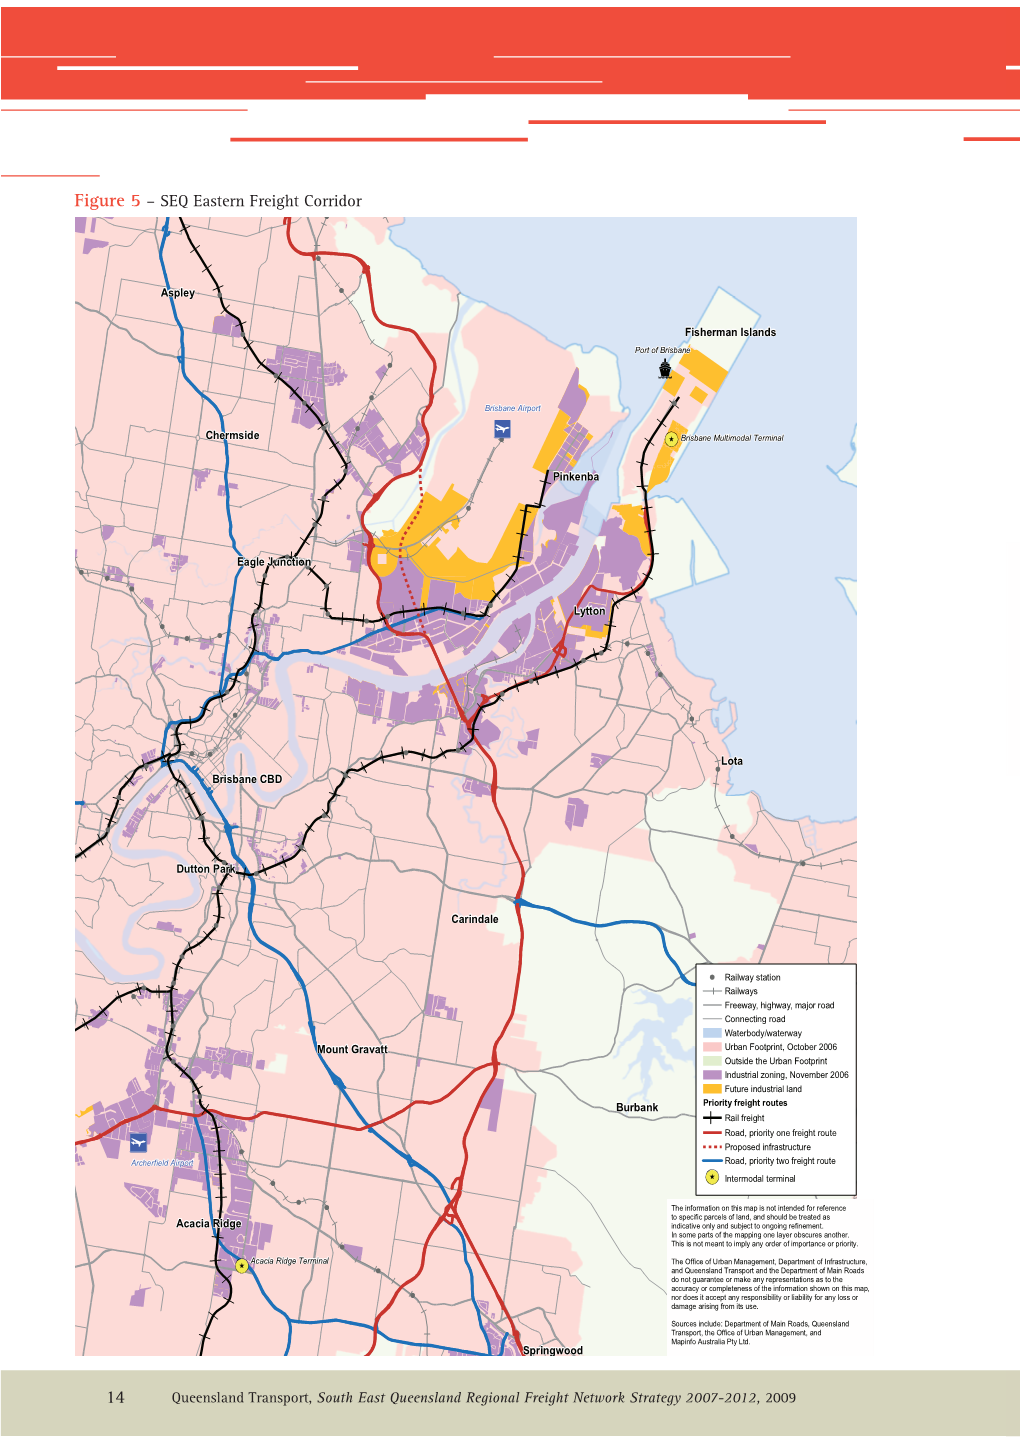 South East Queensland Regional Freight Strategy 2007-2012